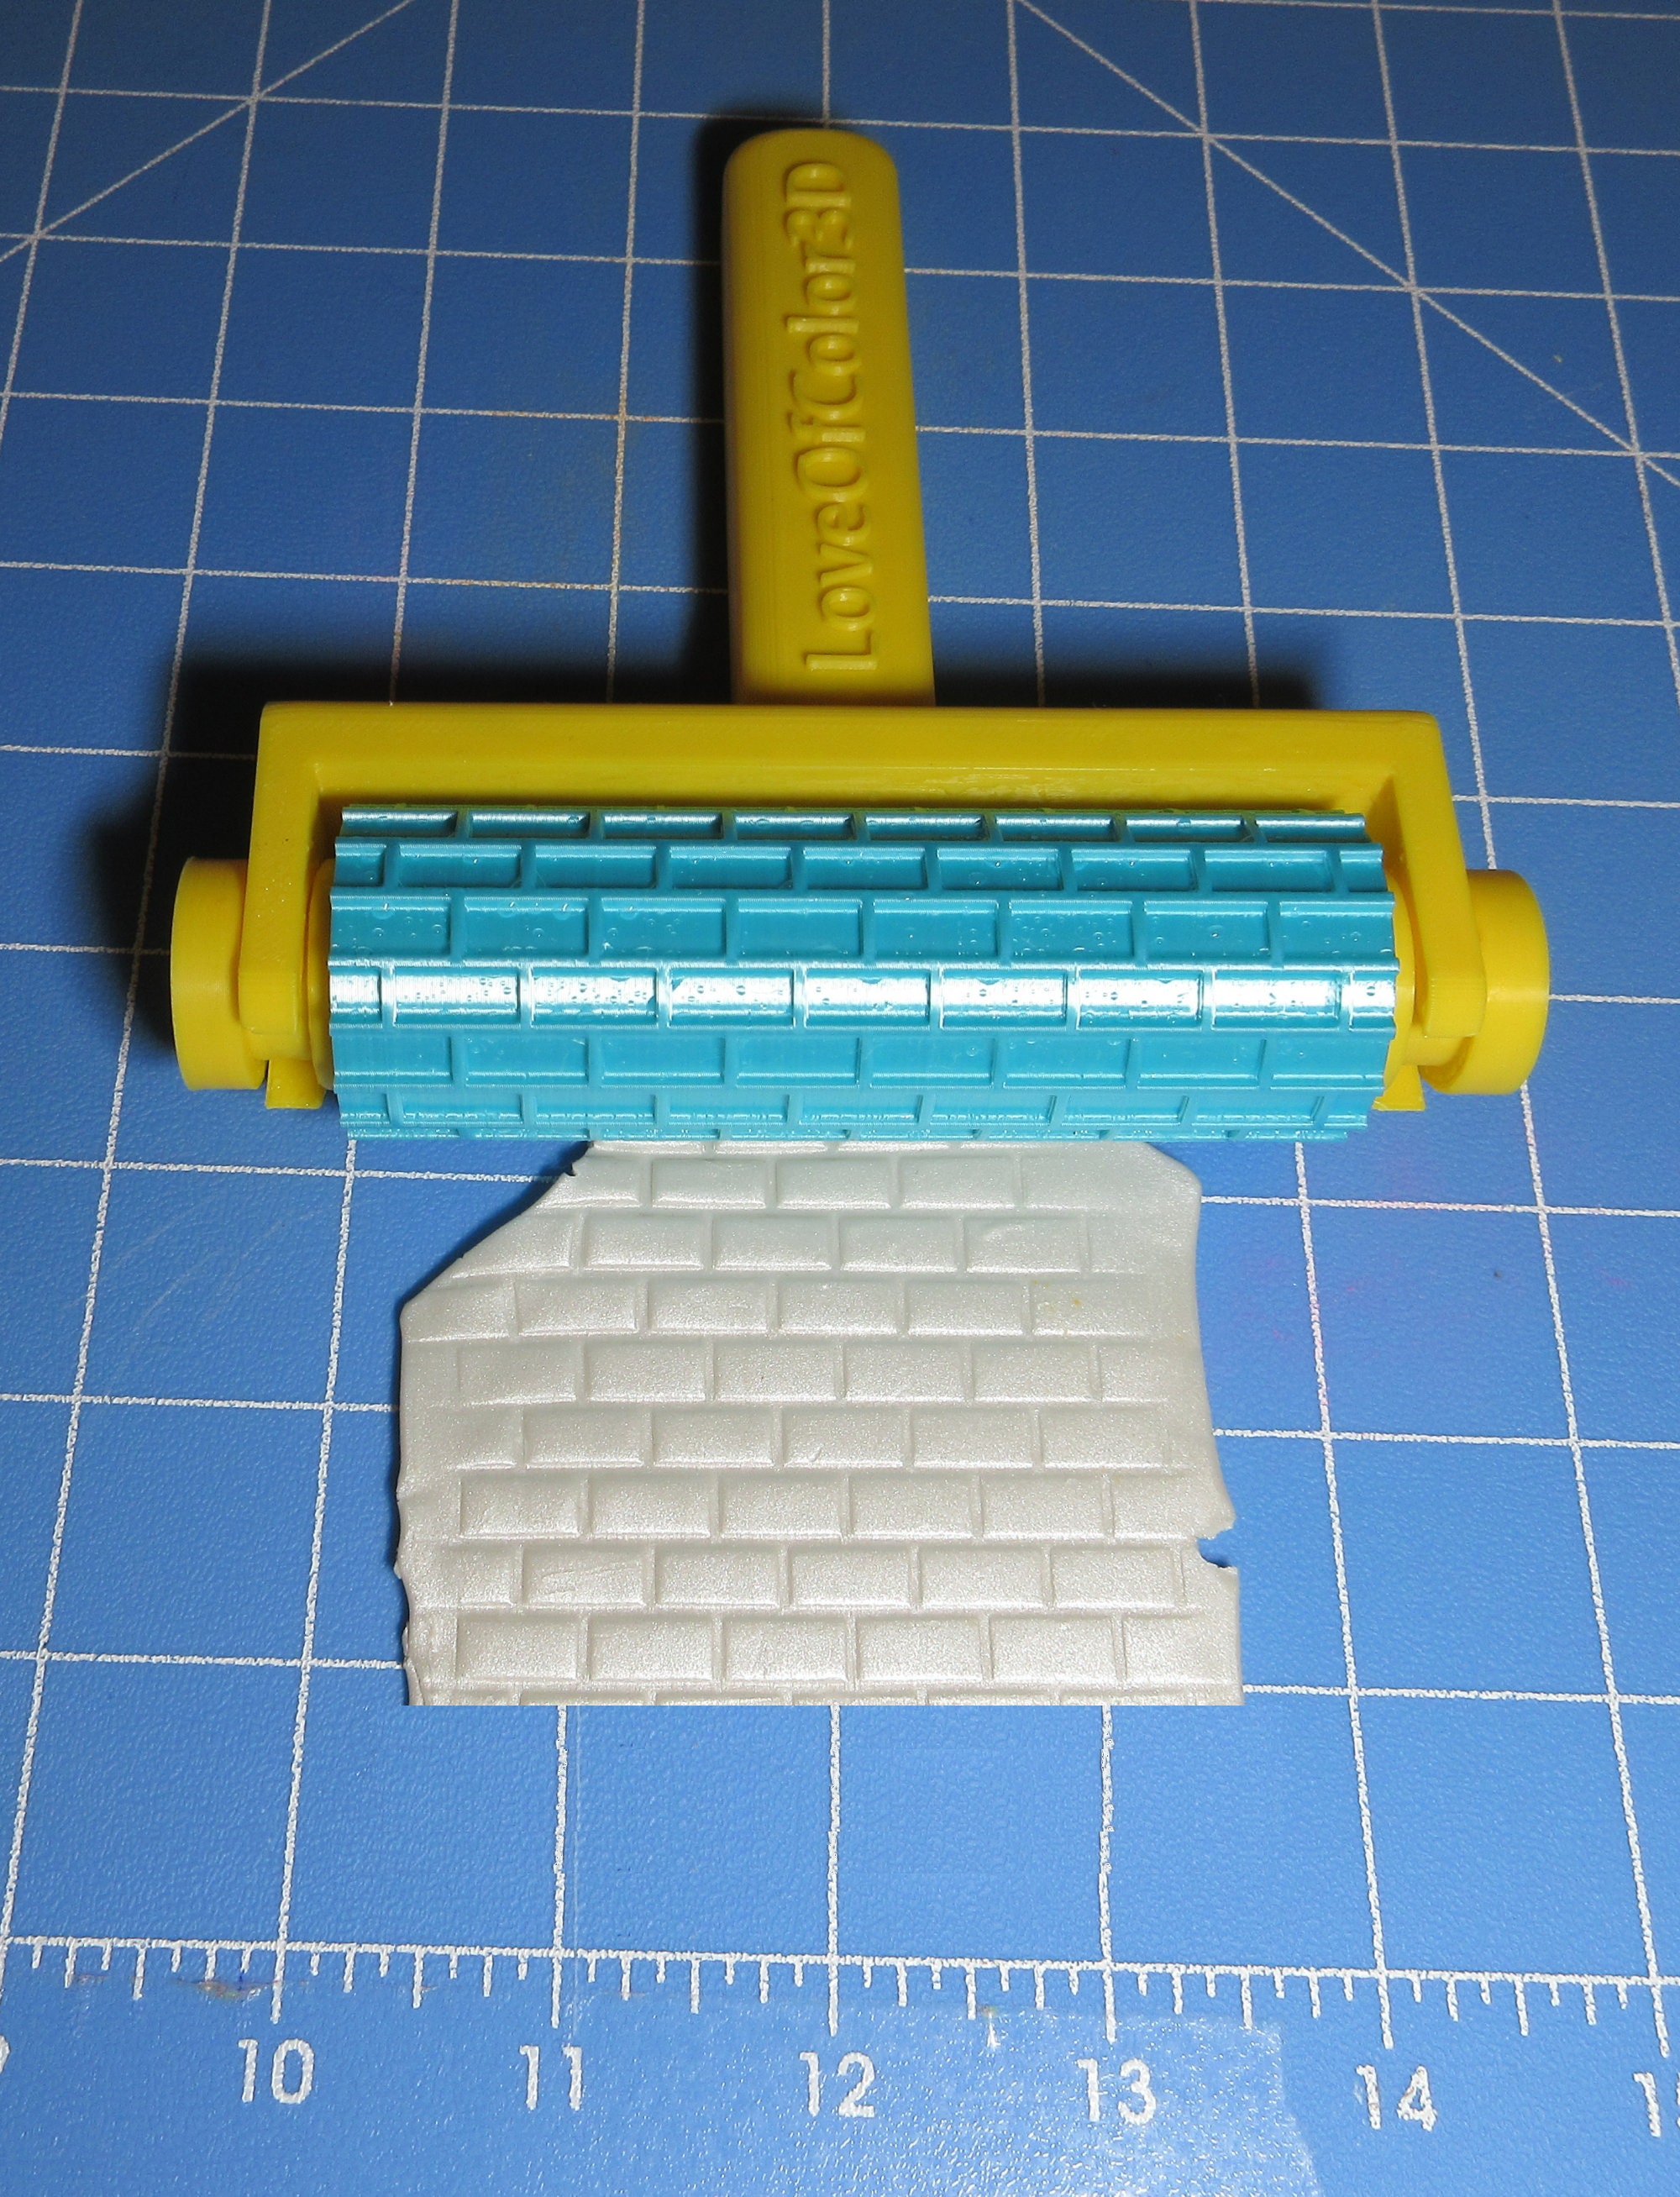 Brick Wall Texture Roller High Quality Texture for Modeling Clay 7 